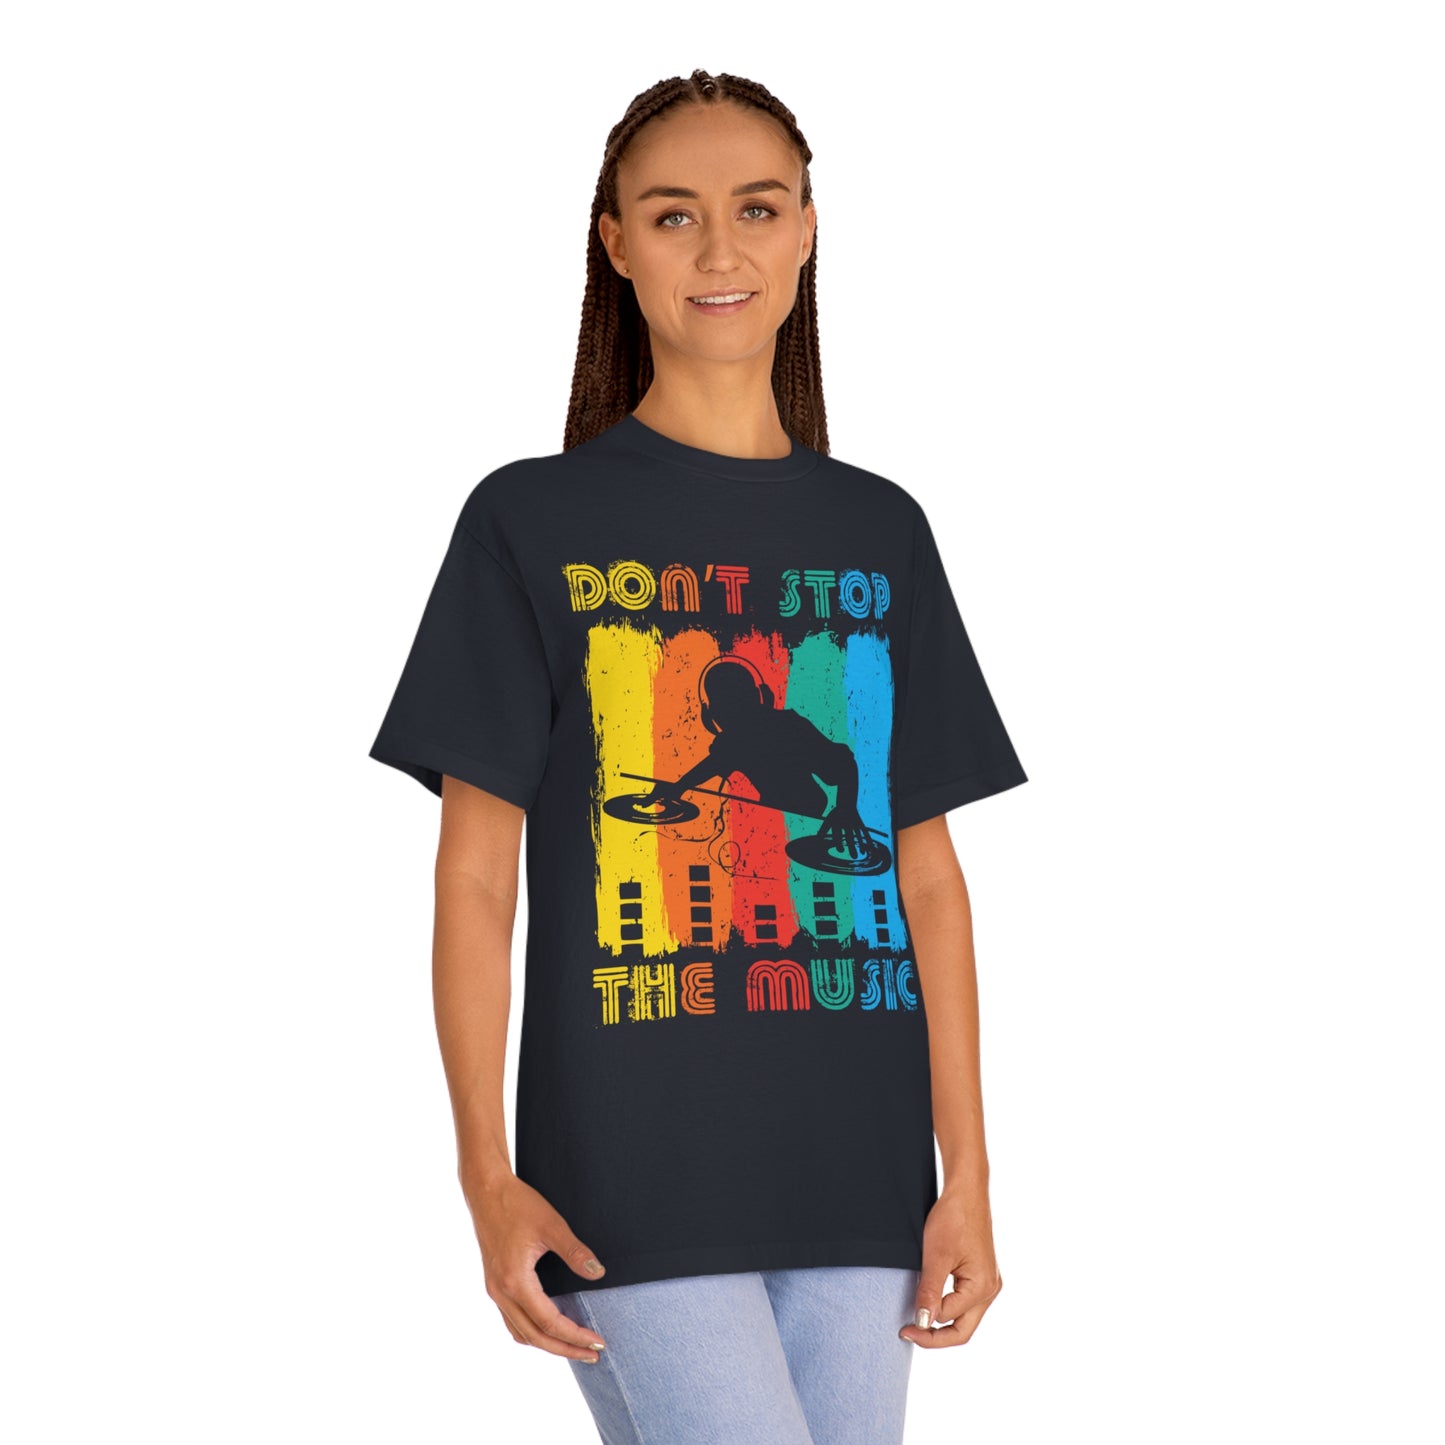 Don't stop the music Unisex Classic Tee